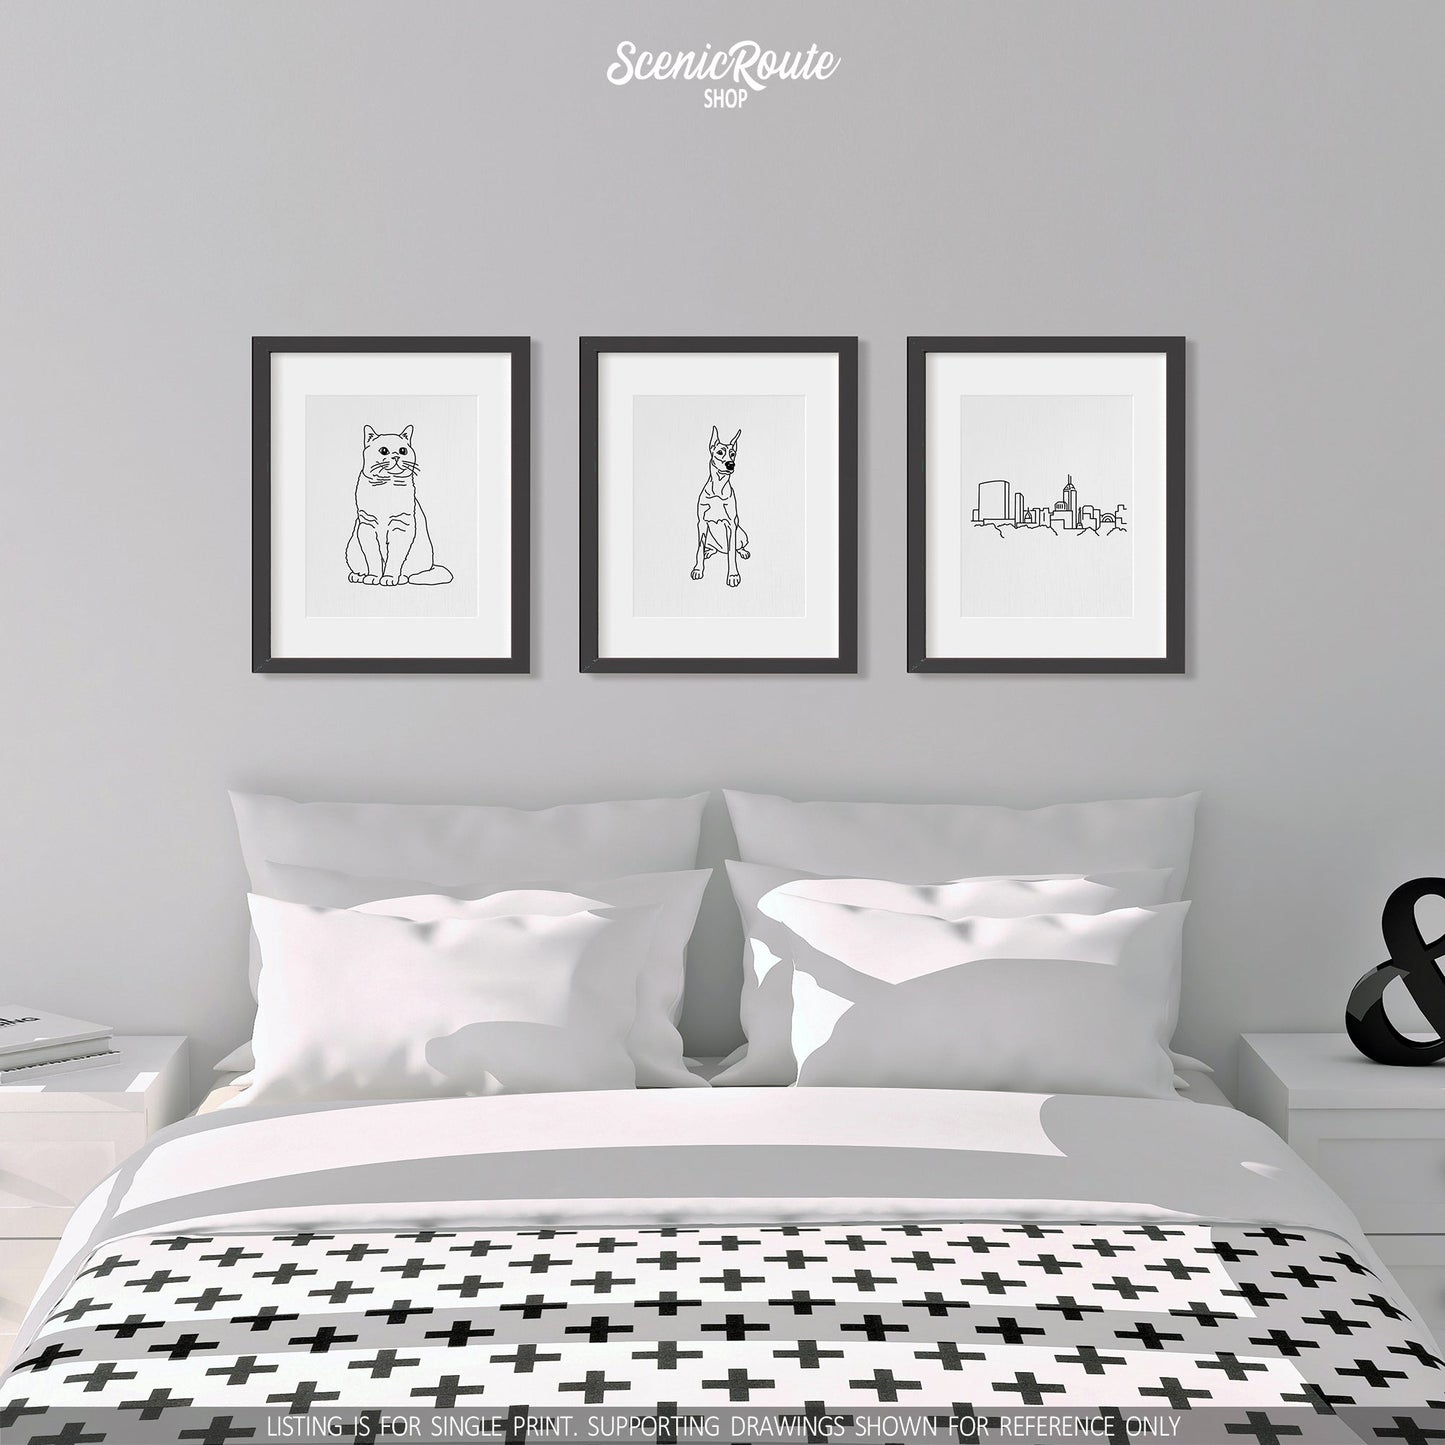 A group of three framed drawings on a white wall above a bed on a white wall. The line art drawings include a British Shorthair cat, a Doberman dog, and the Indianapolis Skyline